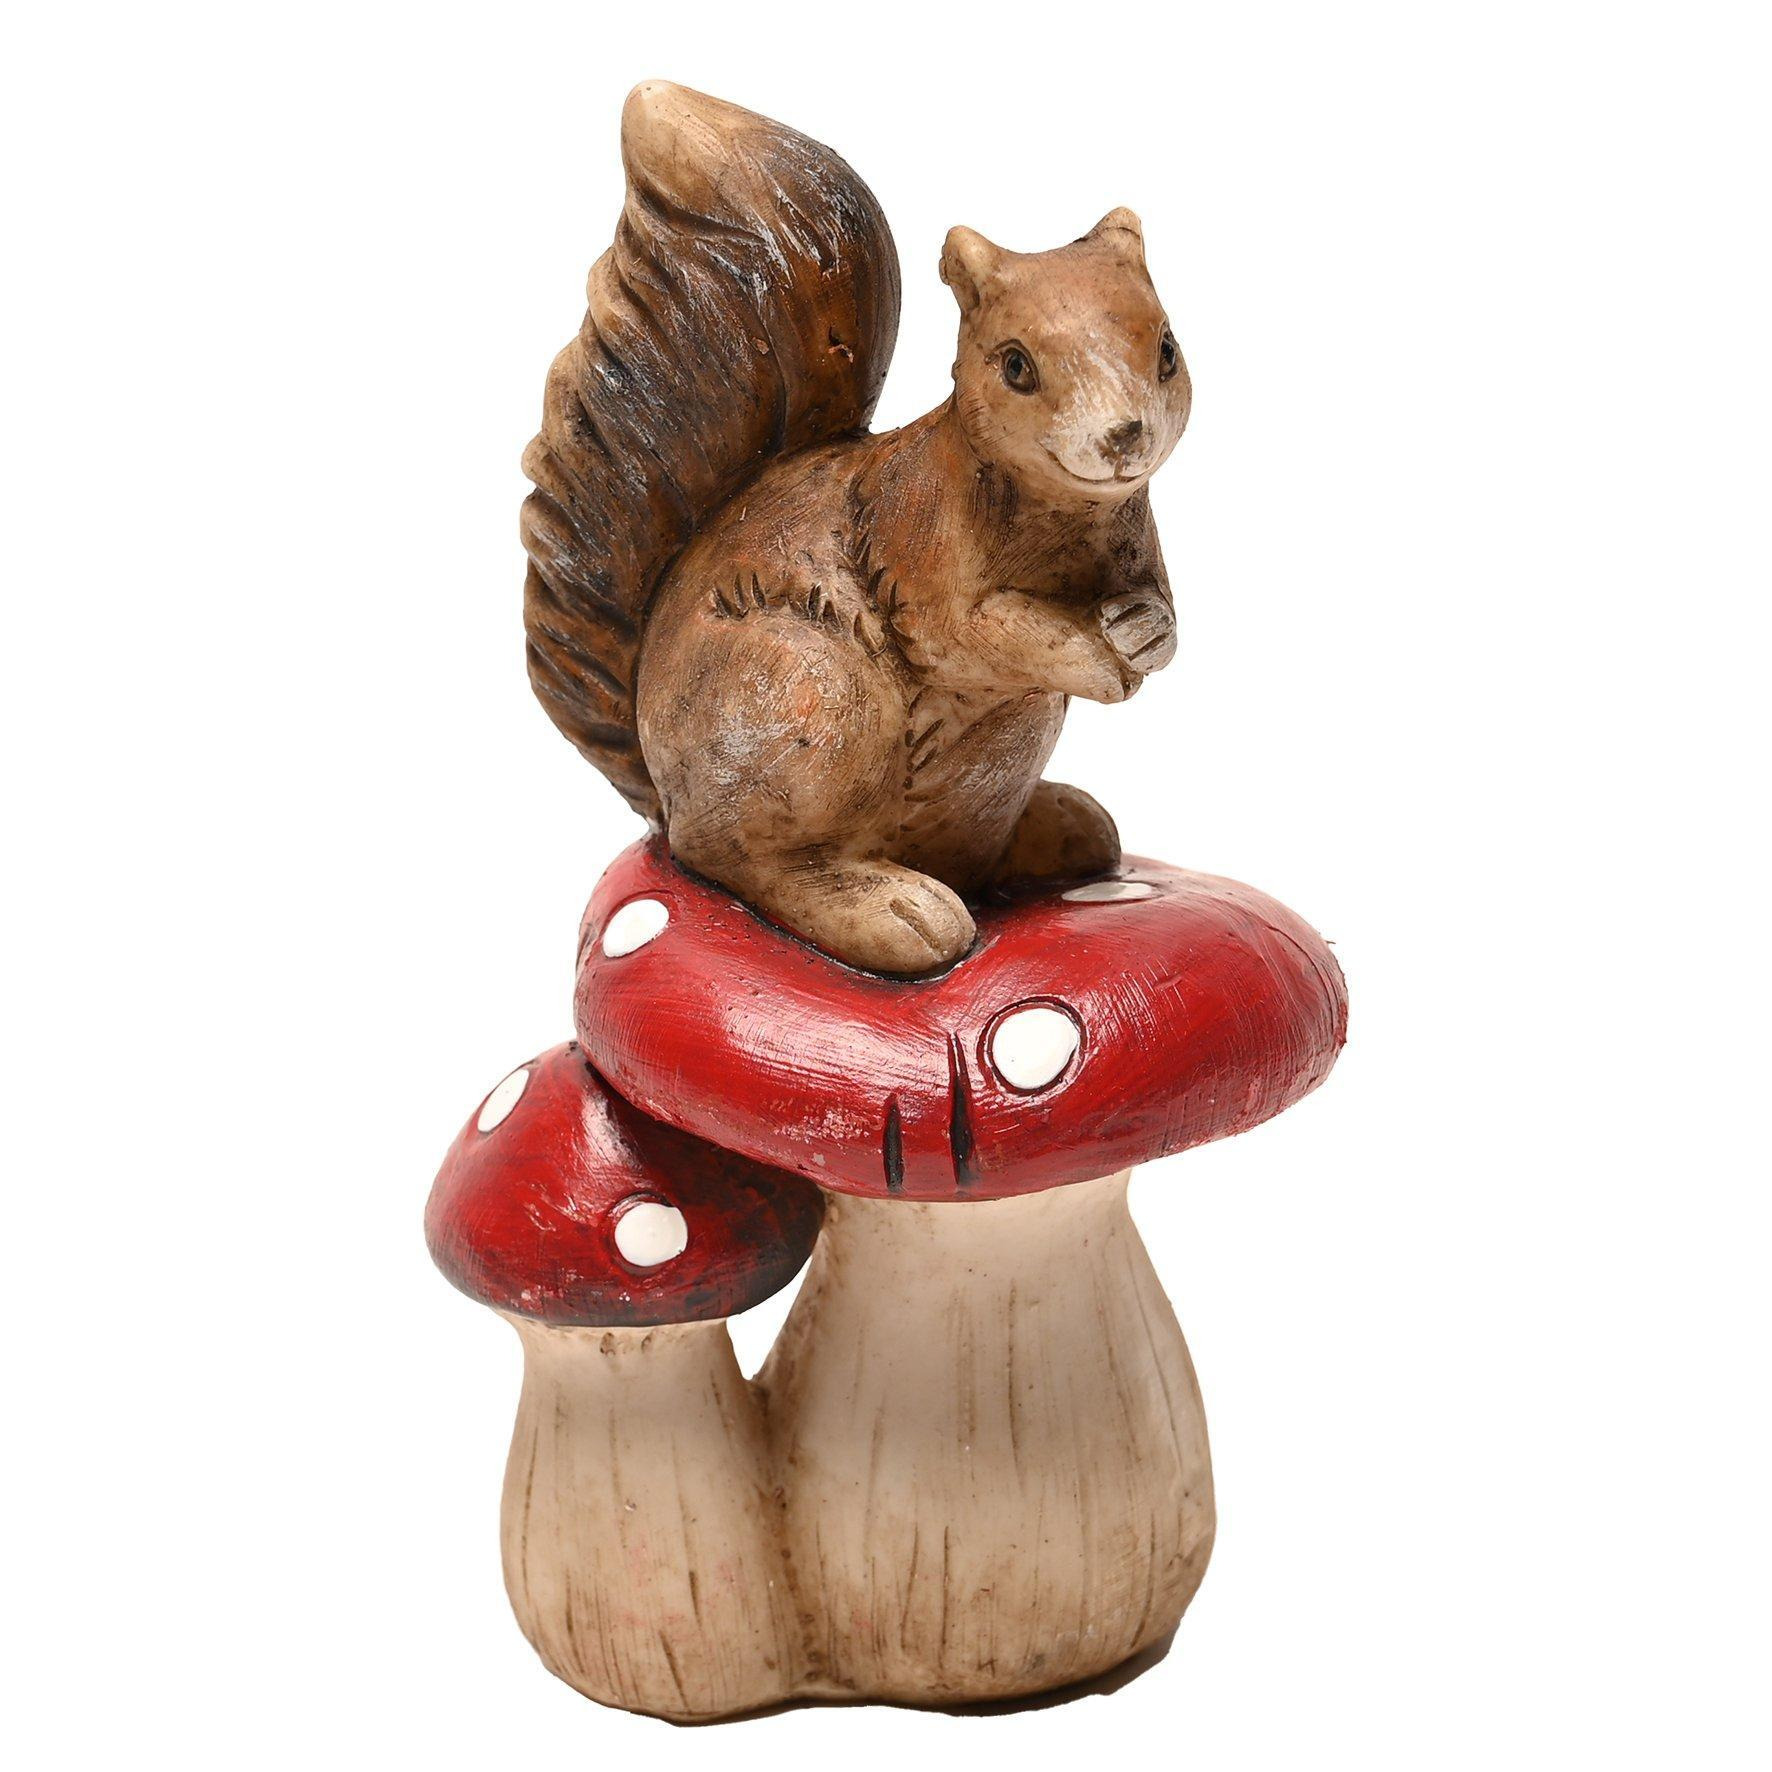 Country Living Squirrel Standing on Mushrooms Ornament - image 1